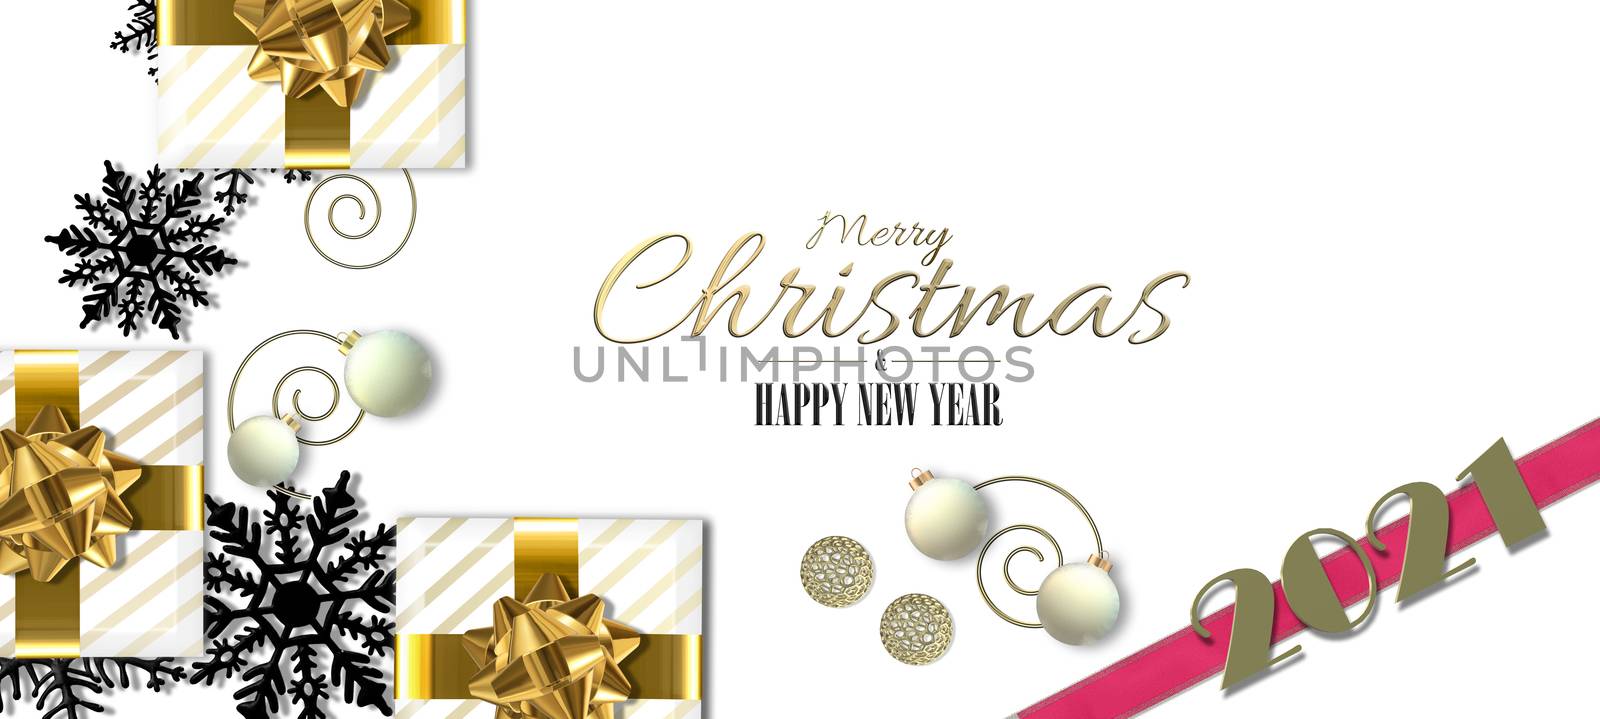 Christmas luxury design with Xmas 3D realistic gift boxes, snowflakes, gold digit 2021 on pink ribbon, Xmas balls on white background. 3D illustration. Copy space.